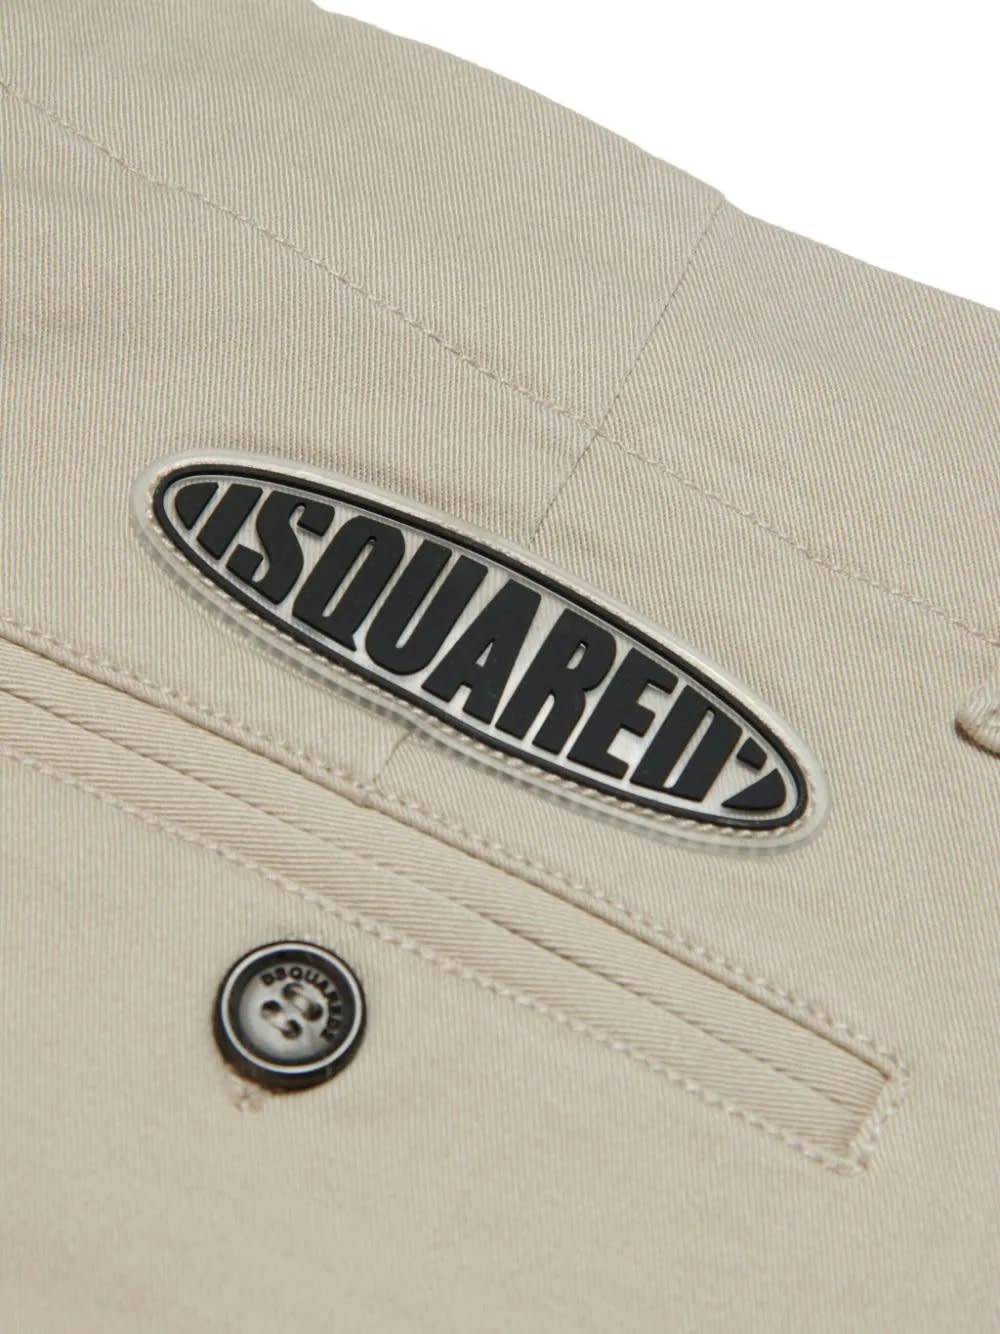 Shop Dsquared2 Beige Shorts With Crumpled Effect In Brown